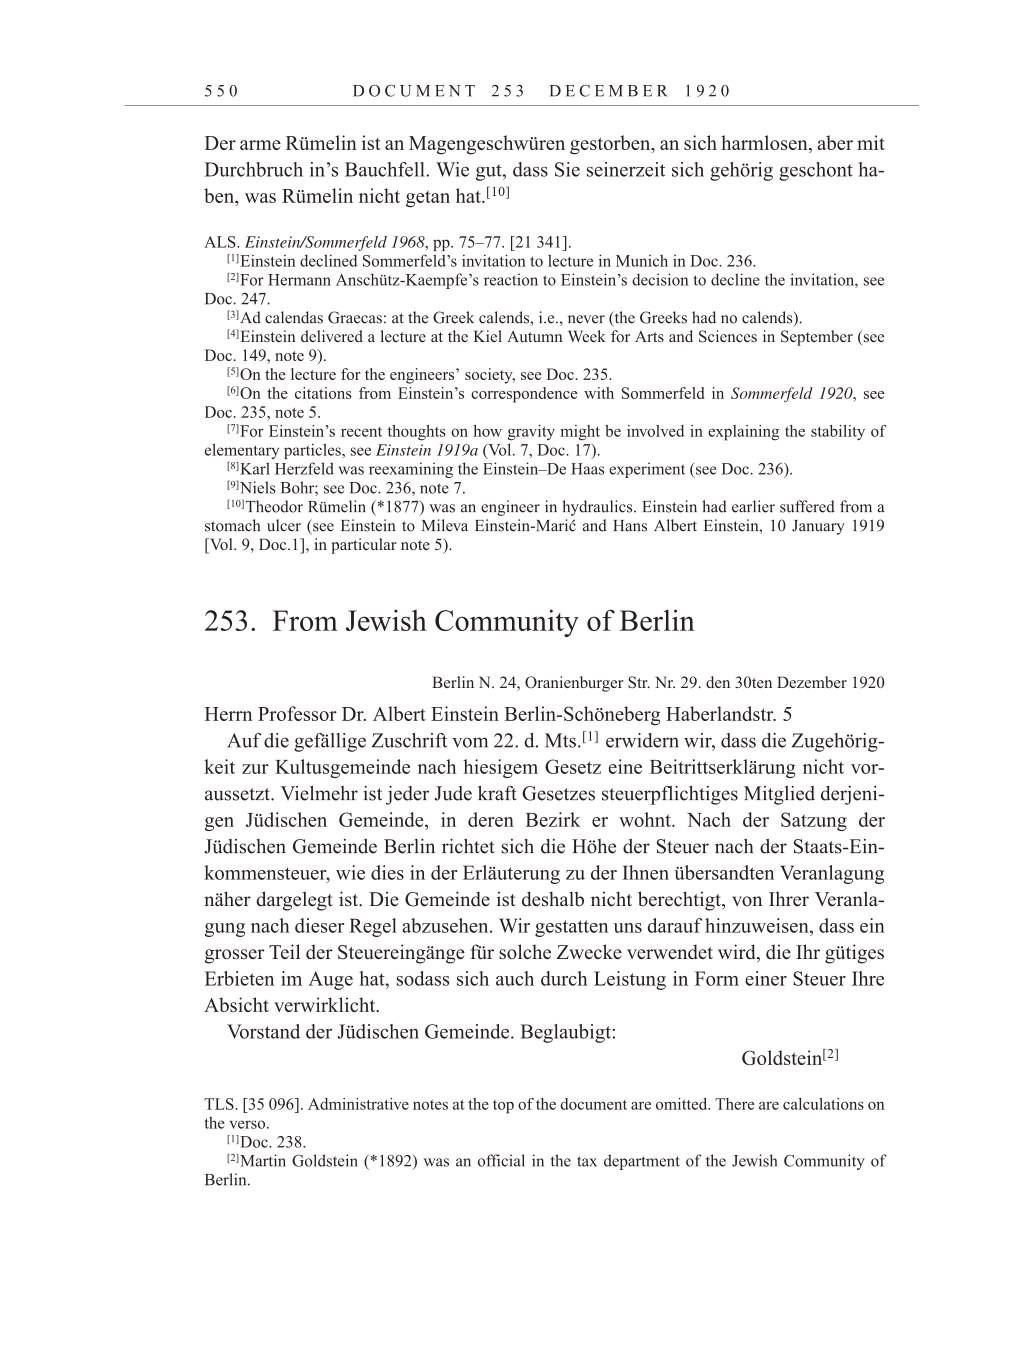 Volume 10: The Berlin Years: Correspondence May-December 1920 / Supplementary Correspondence 1909-1920 page 550